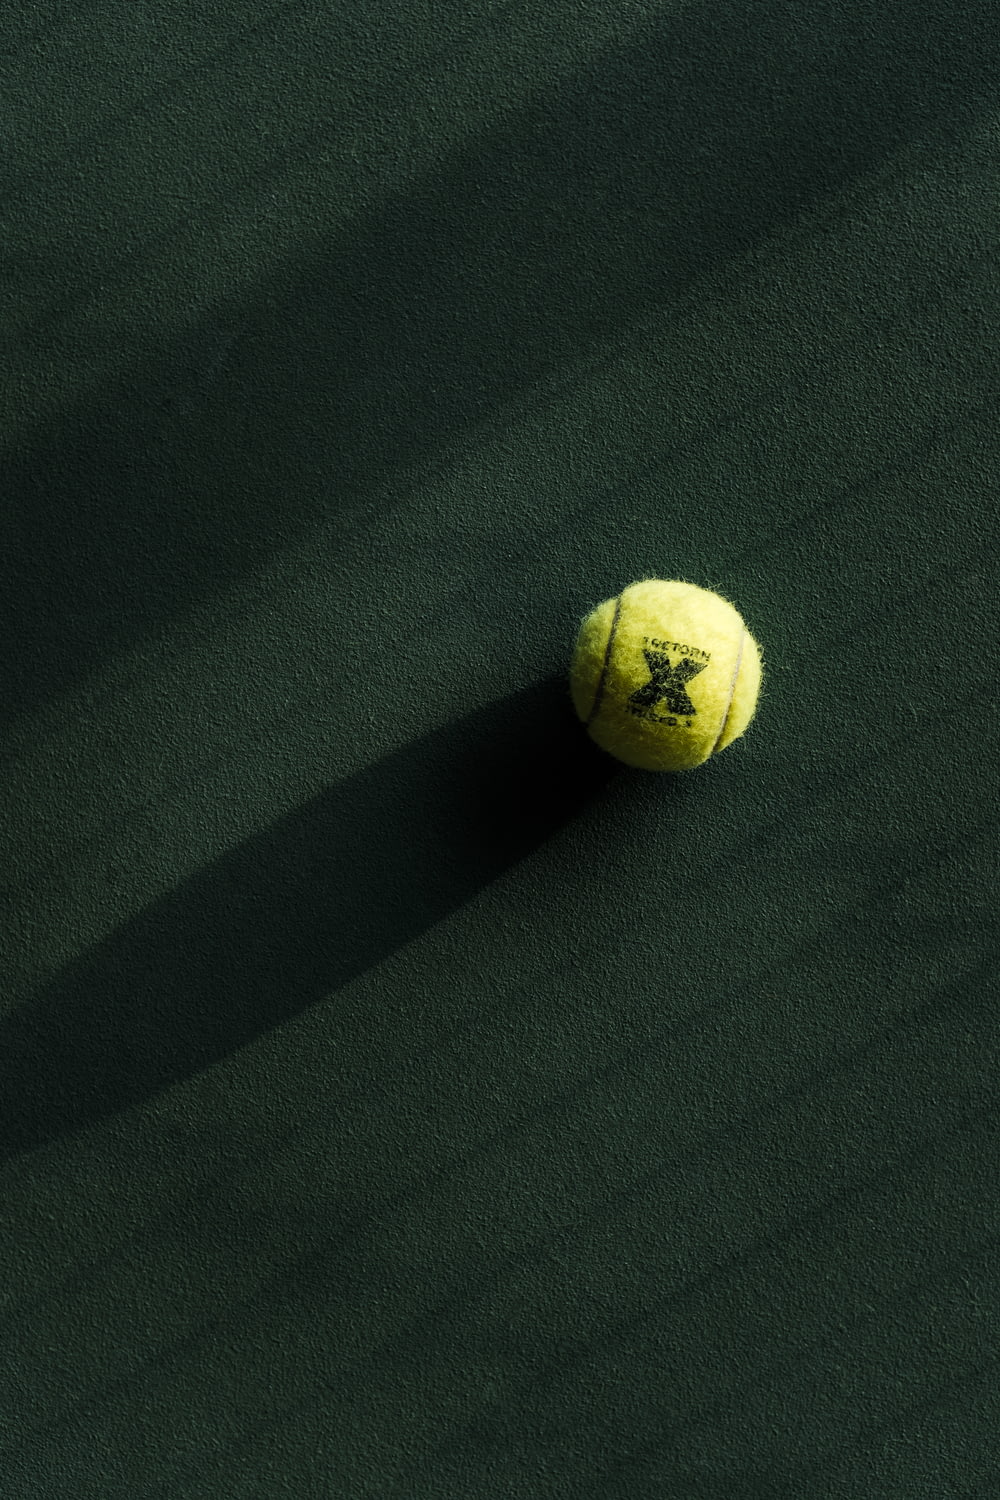 a tennis ball on a green court with a shadow